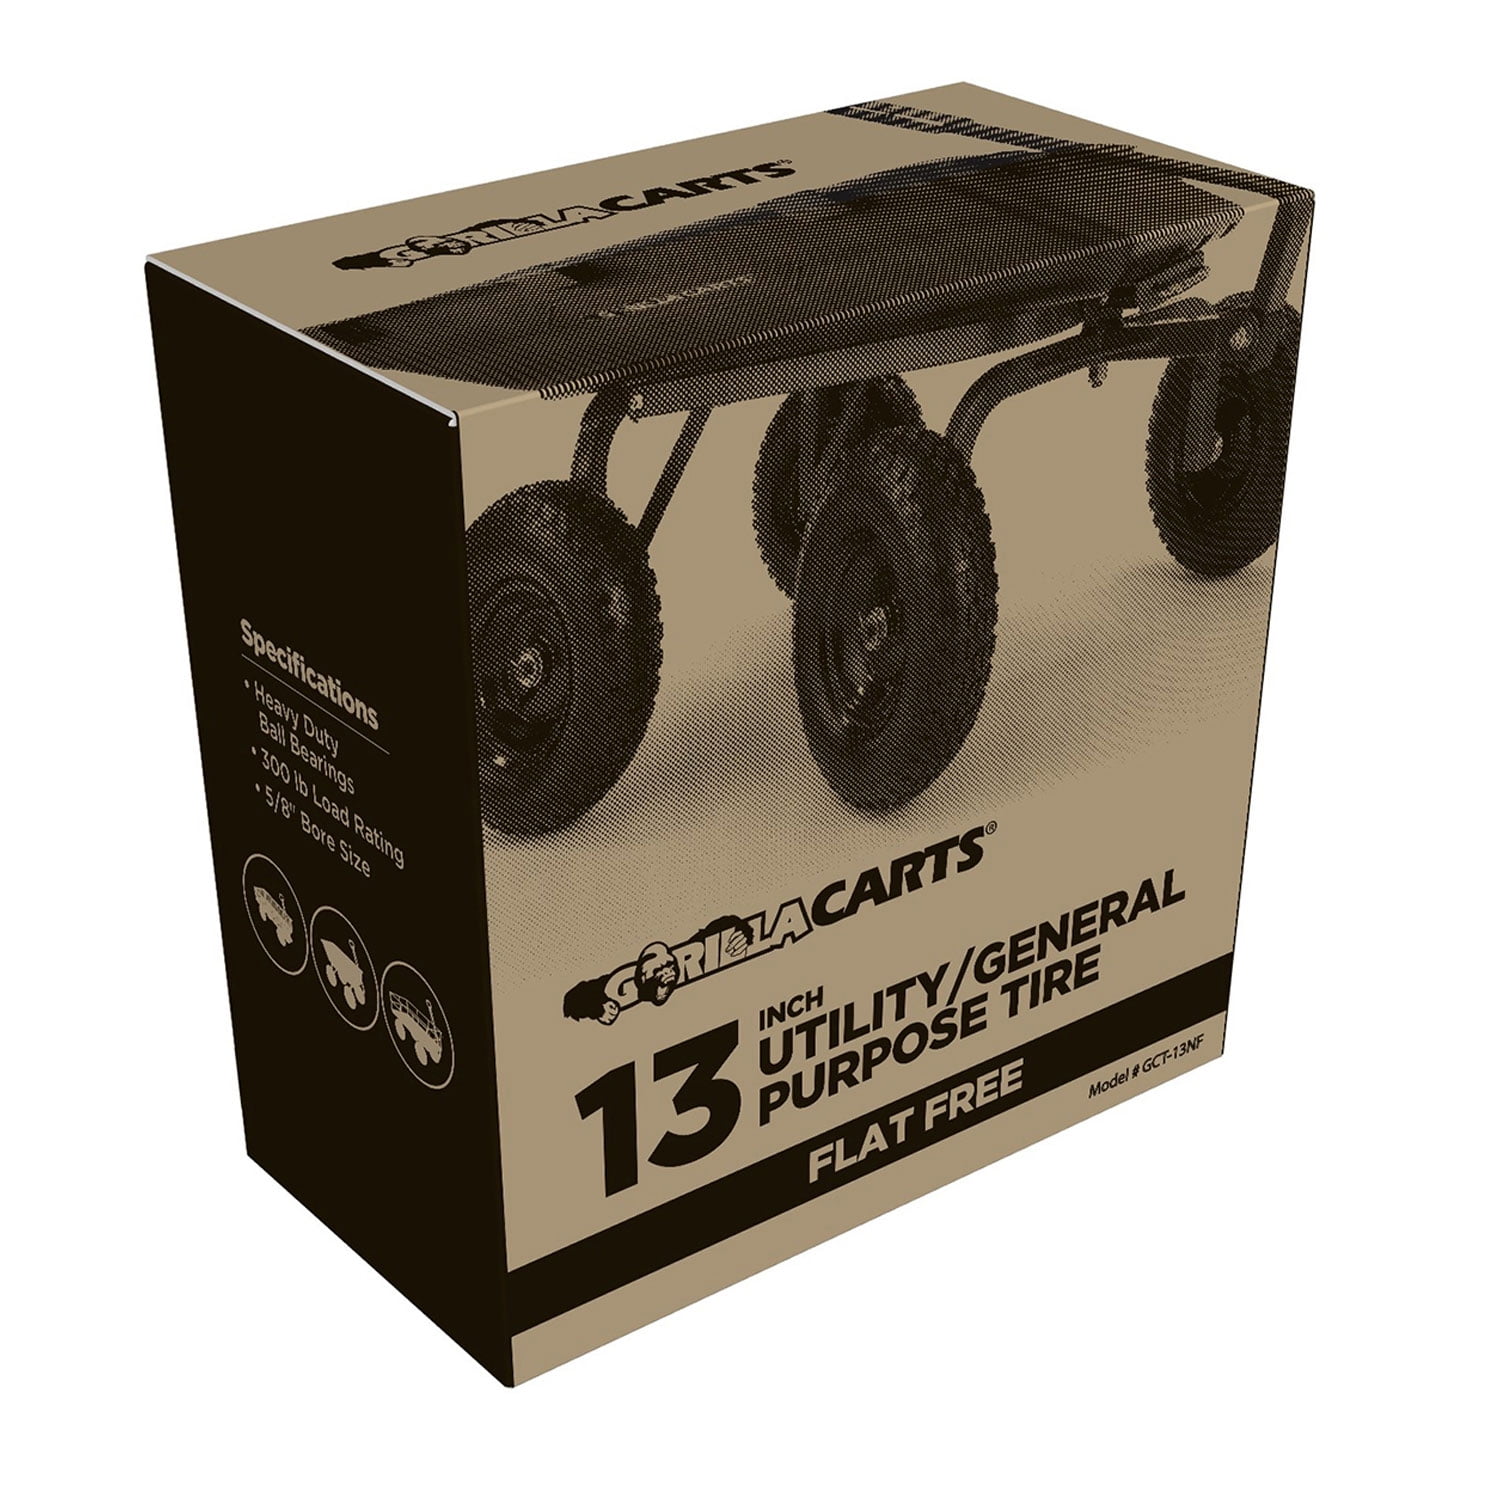 Gorilla Carts GCT-13NF  13" No Flat Replacement Tire 2 Pack 